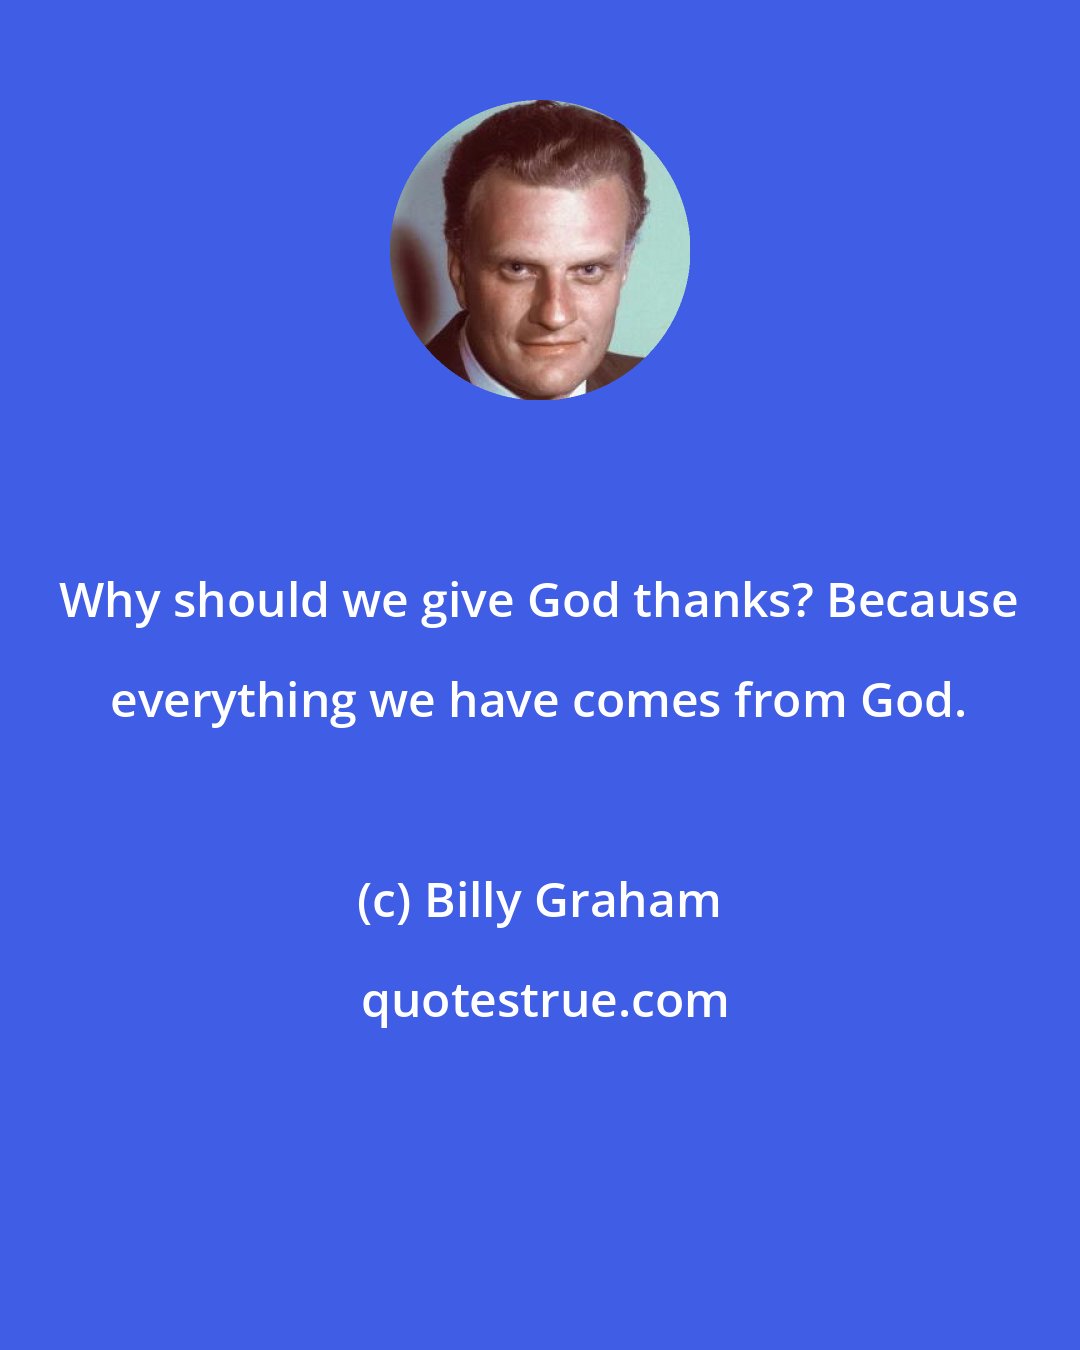 Billy Graham: Why should we give God thanks? Because everything we have comes from God.